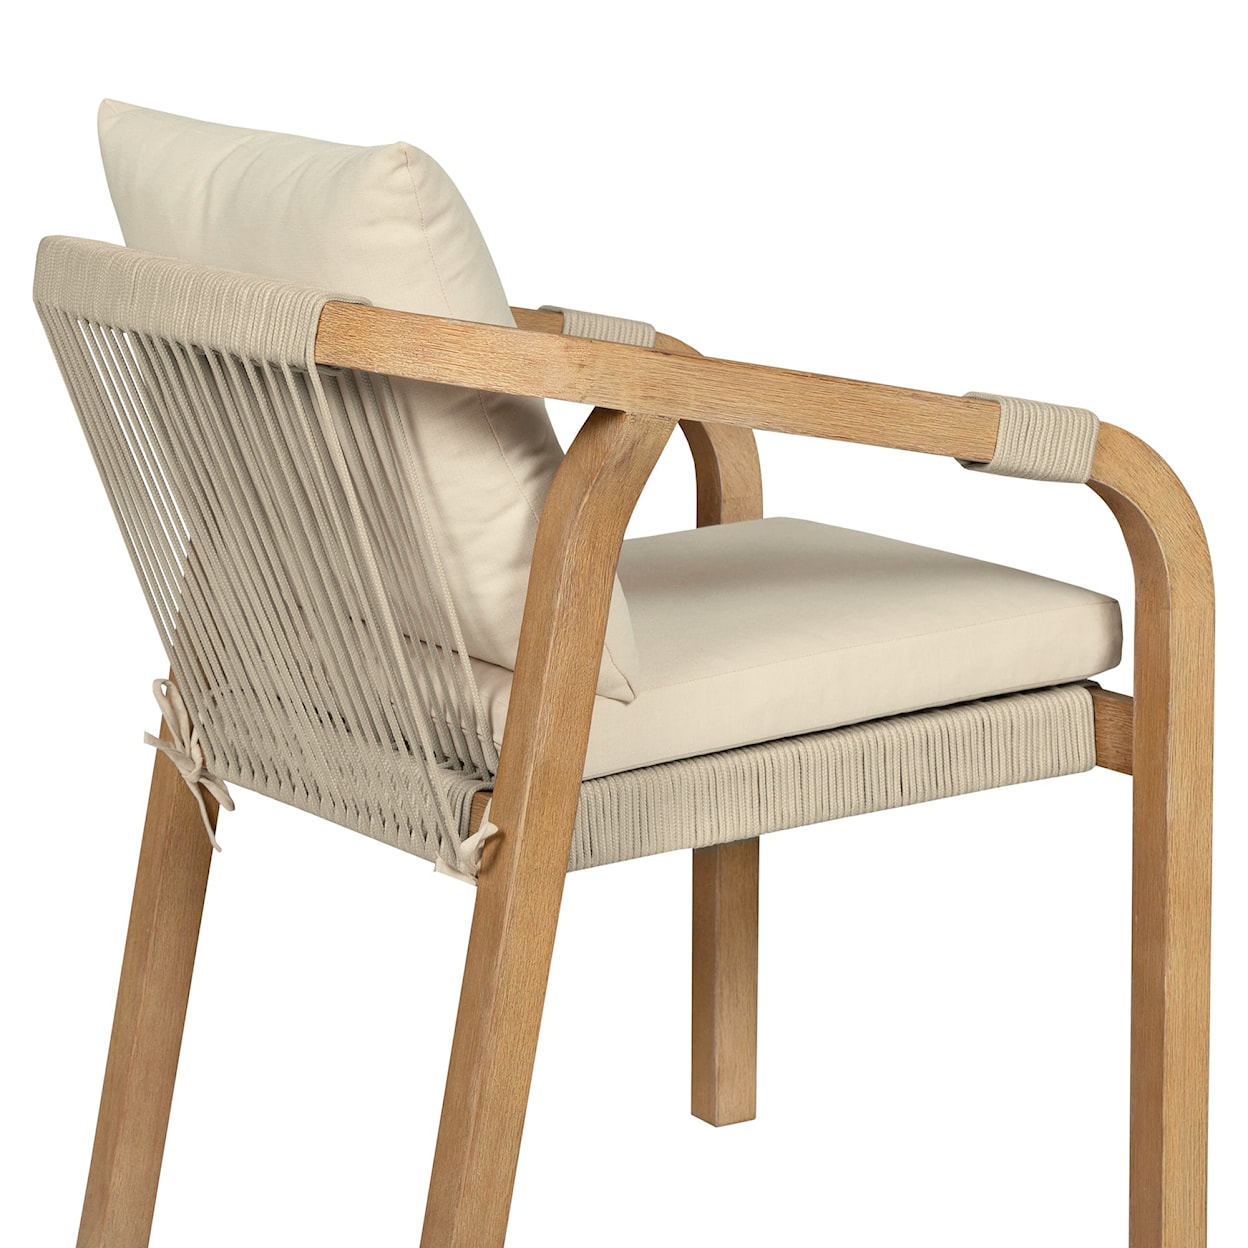 Armen Living Cypress Outdoor Dining Chairs